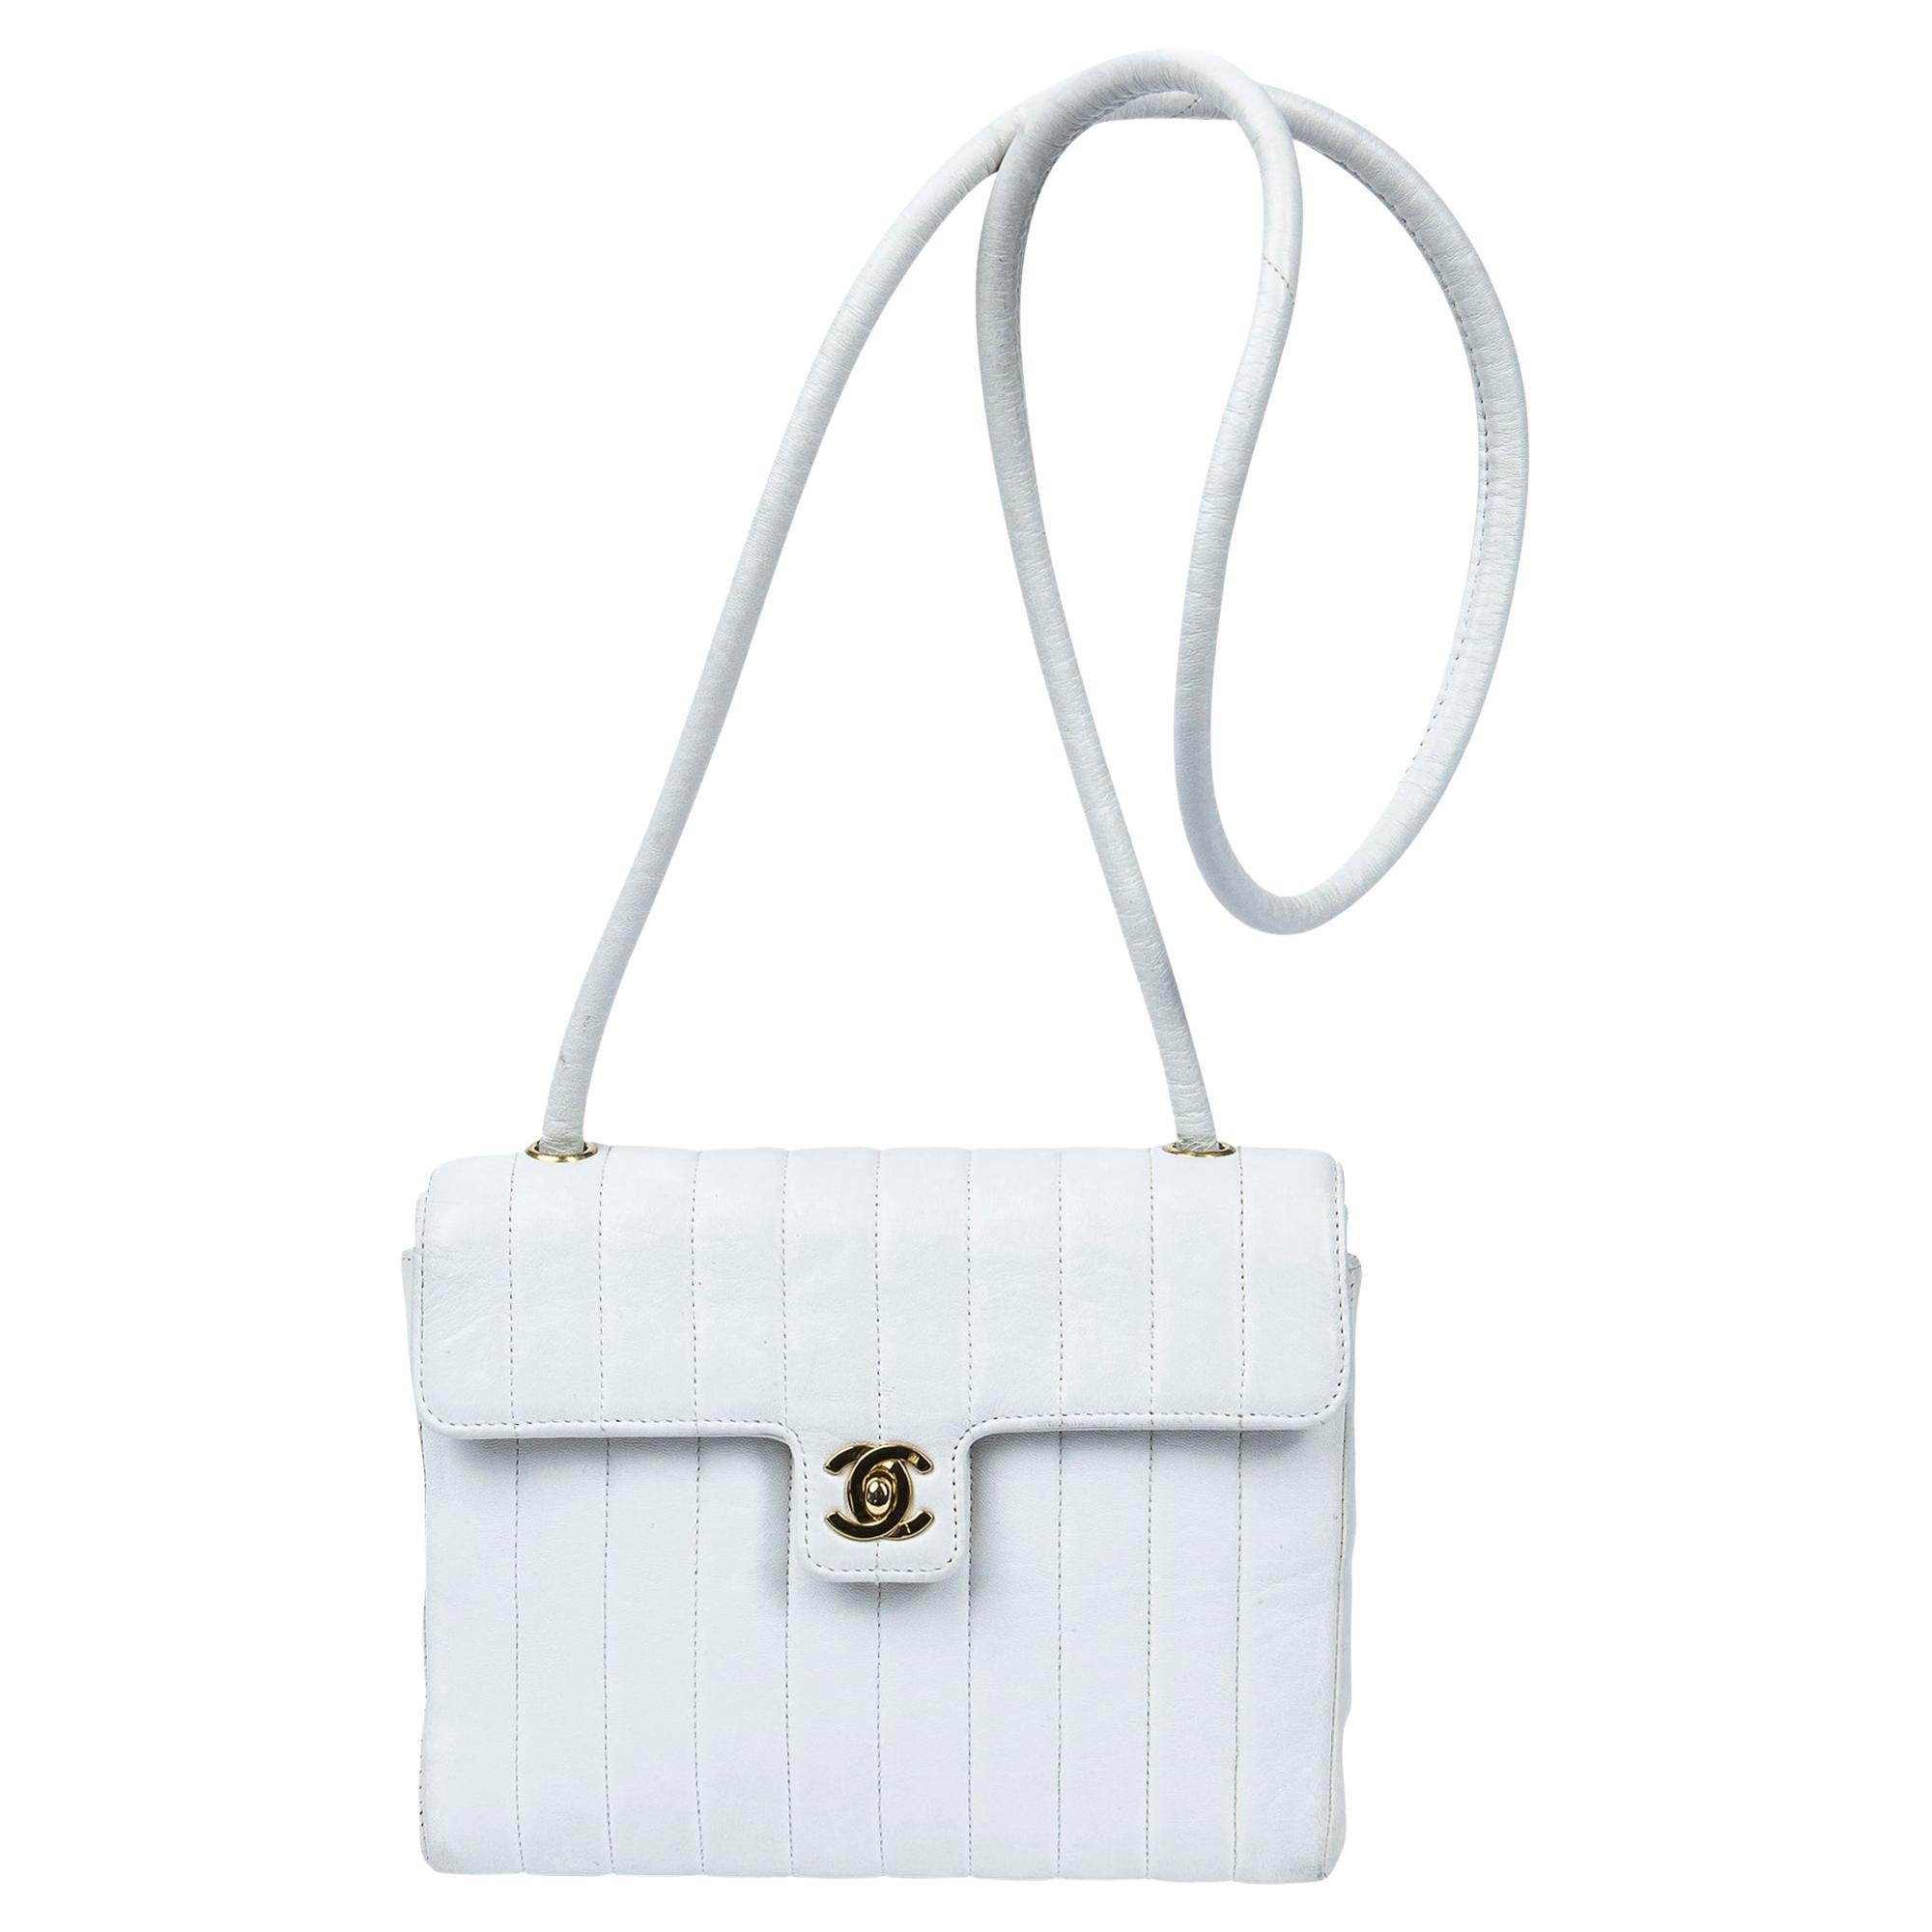 Chanel 1991 White Striated CC Turnlock Flap Bag For Sale